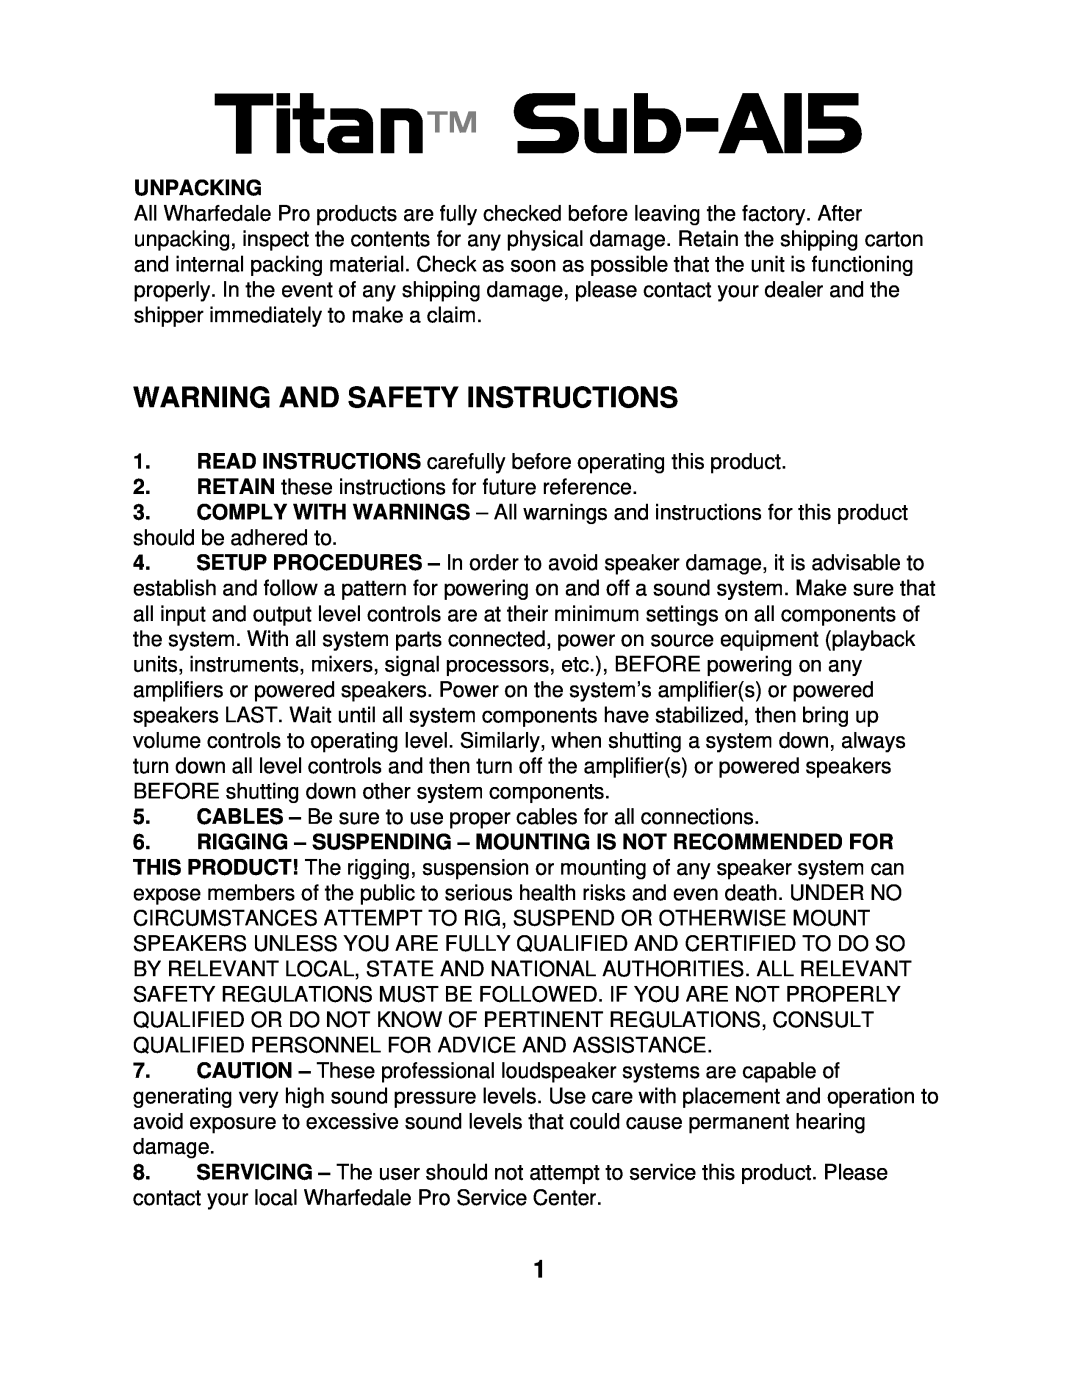 Wharfedale Sub A15 manual Warning And Safety Instructions, Unpacking 